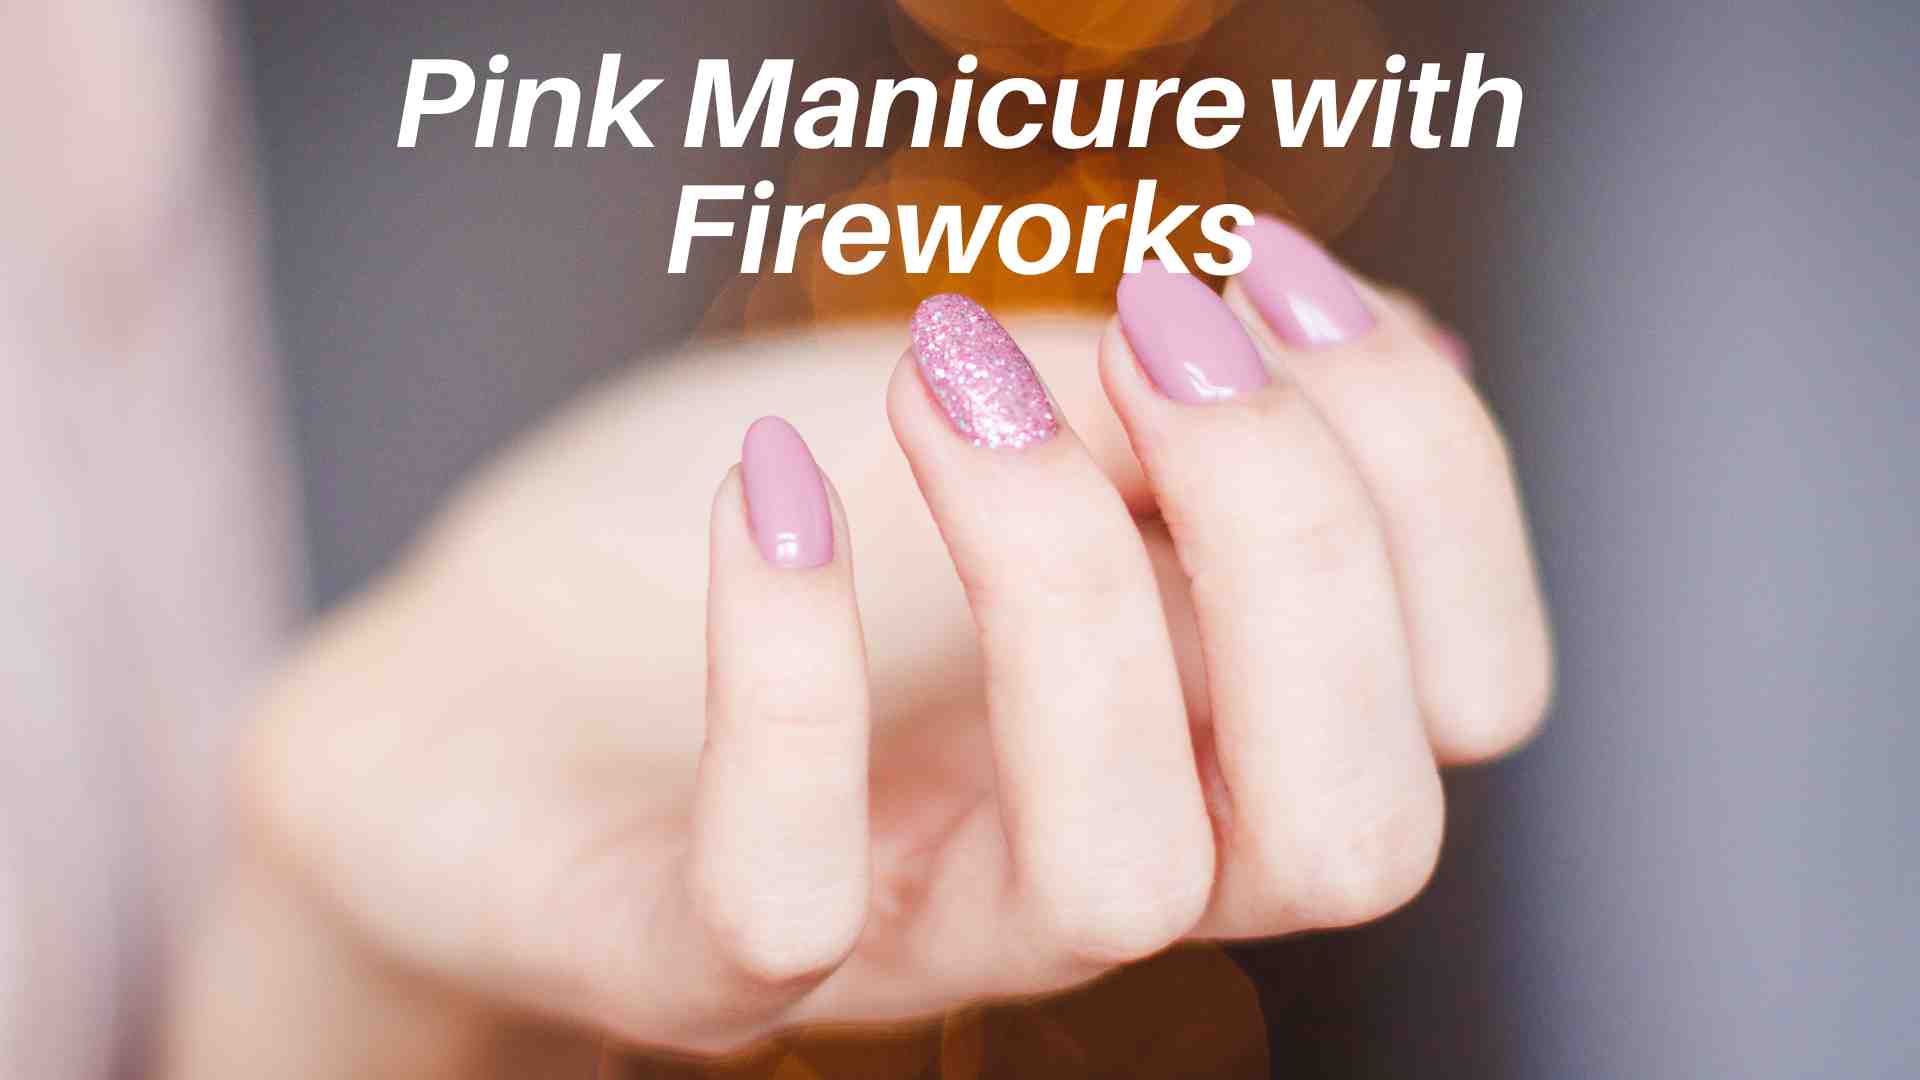 Pink manicure with fireworks